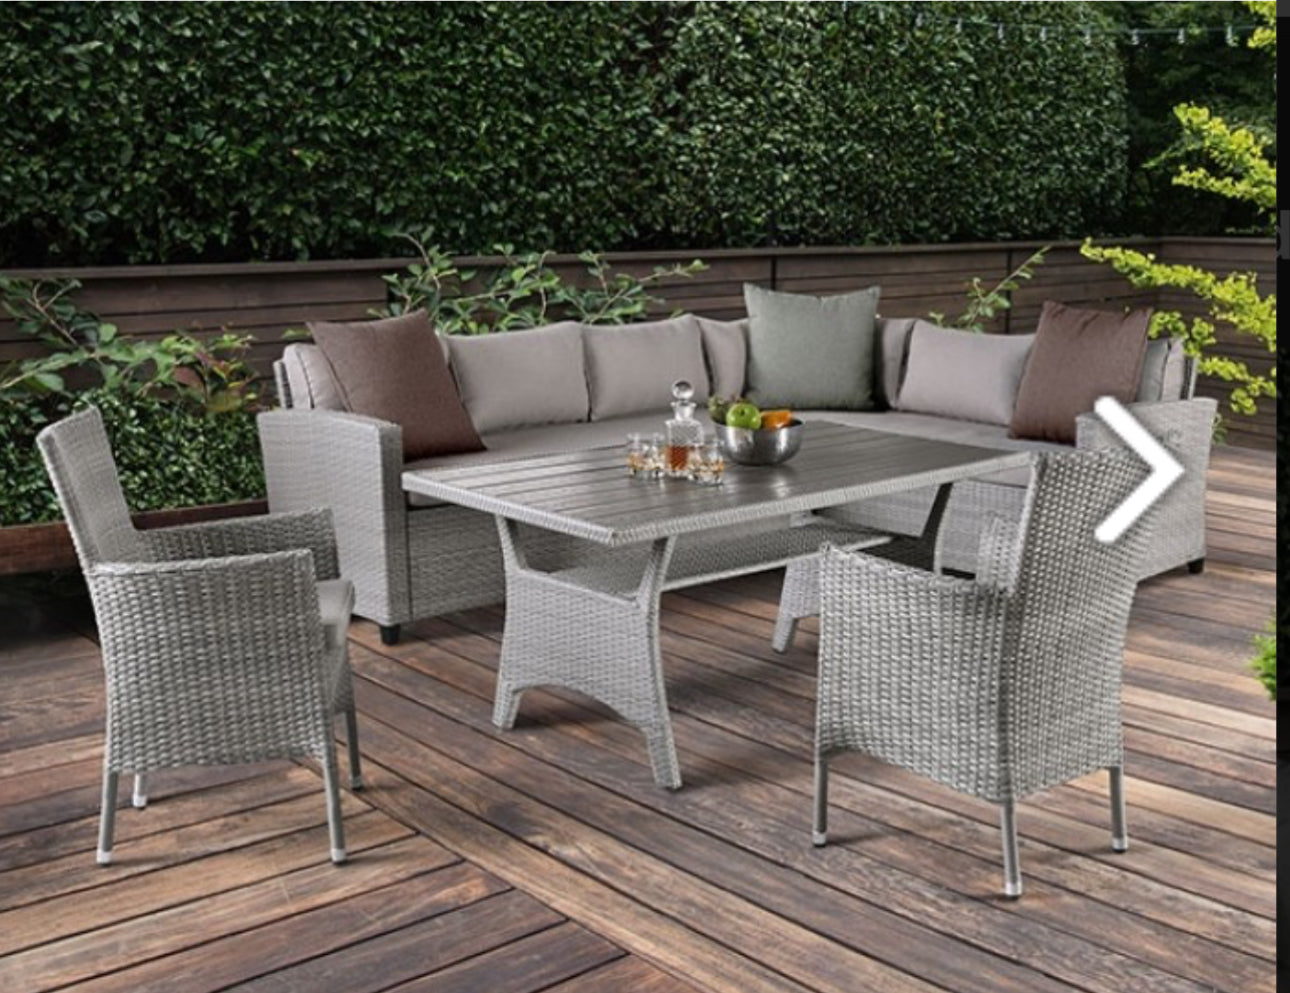 3PC PATIO SET SALE PRICE IS FIRM